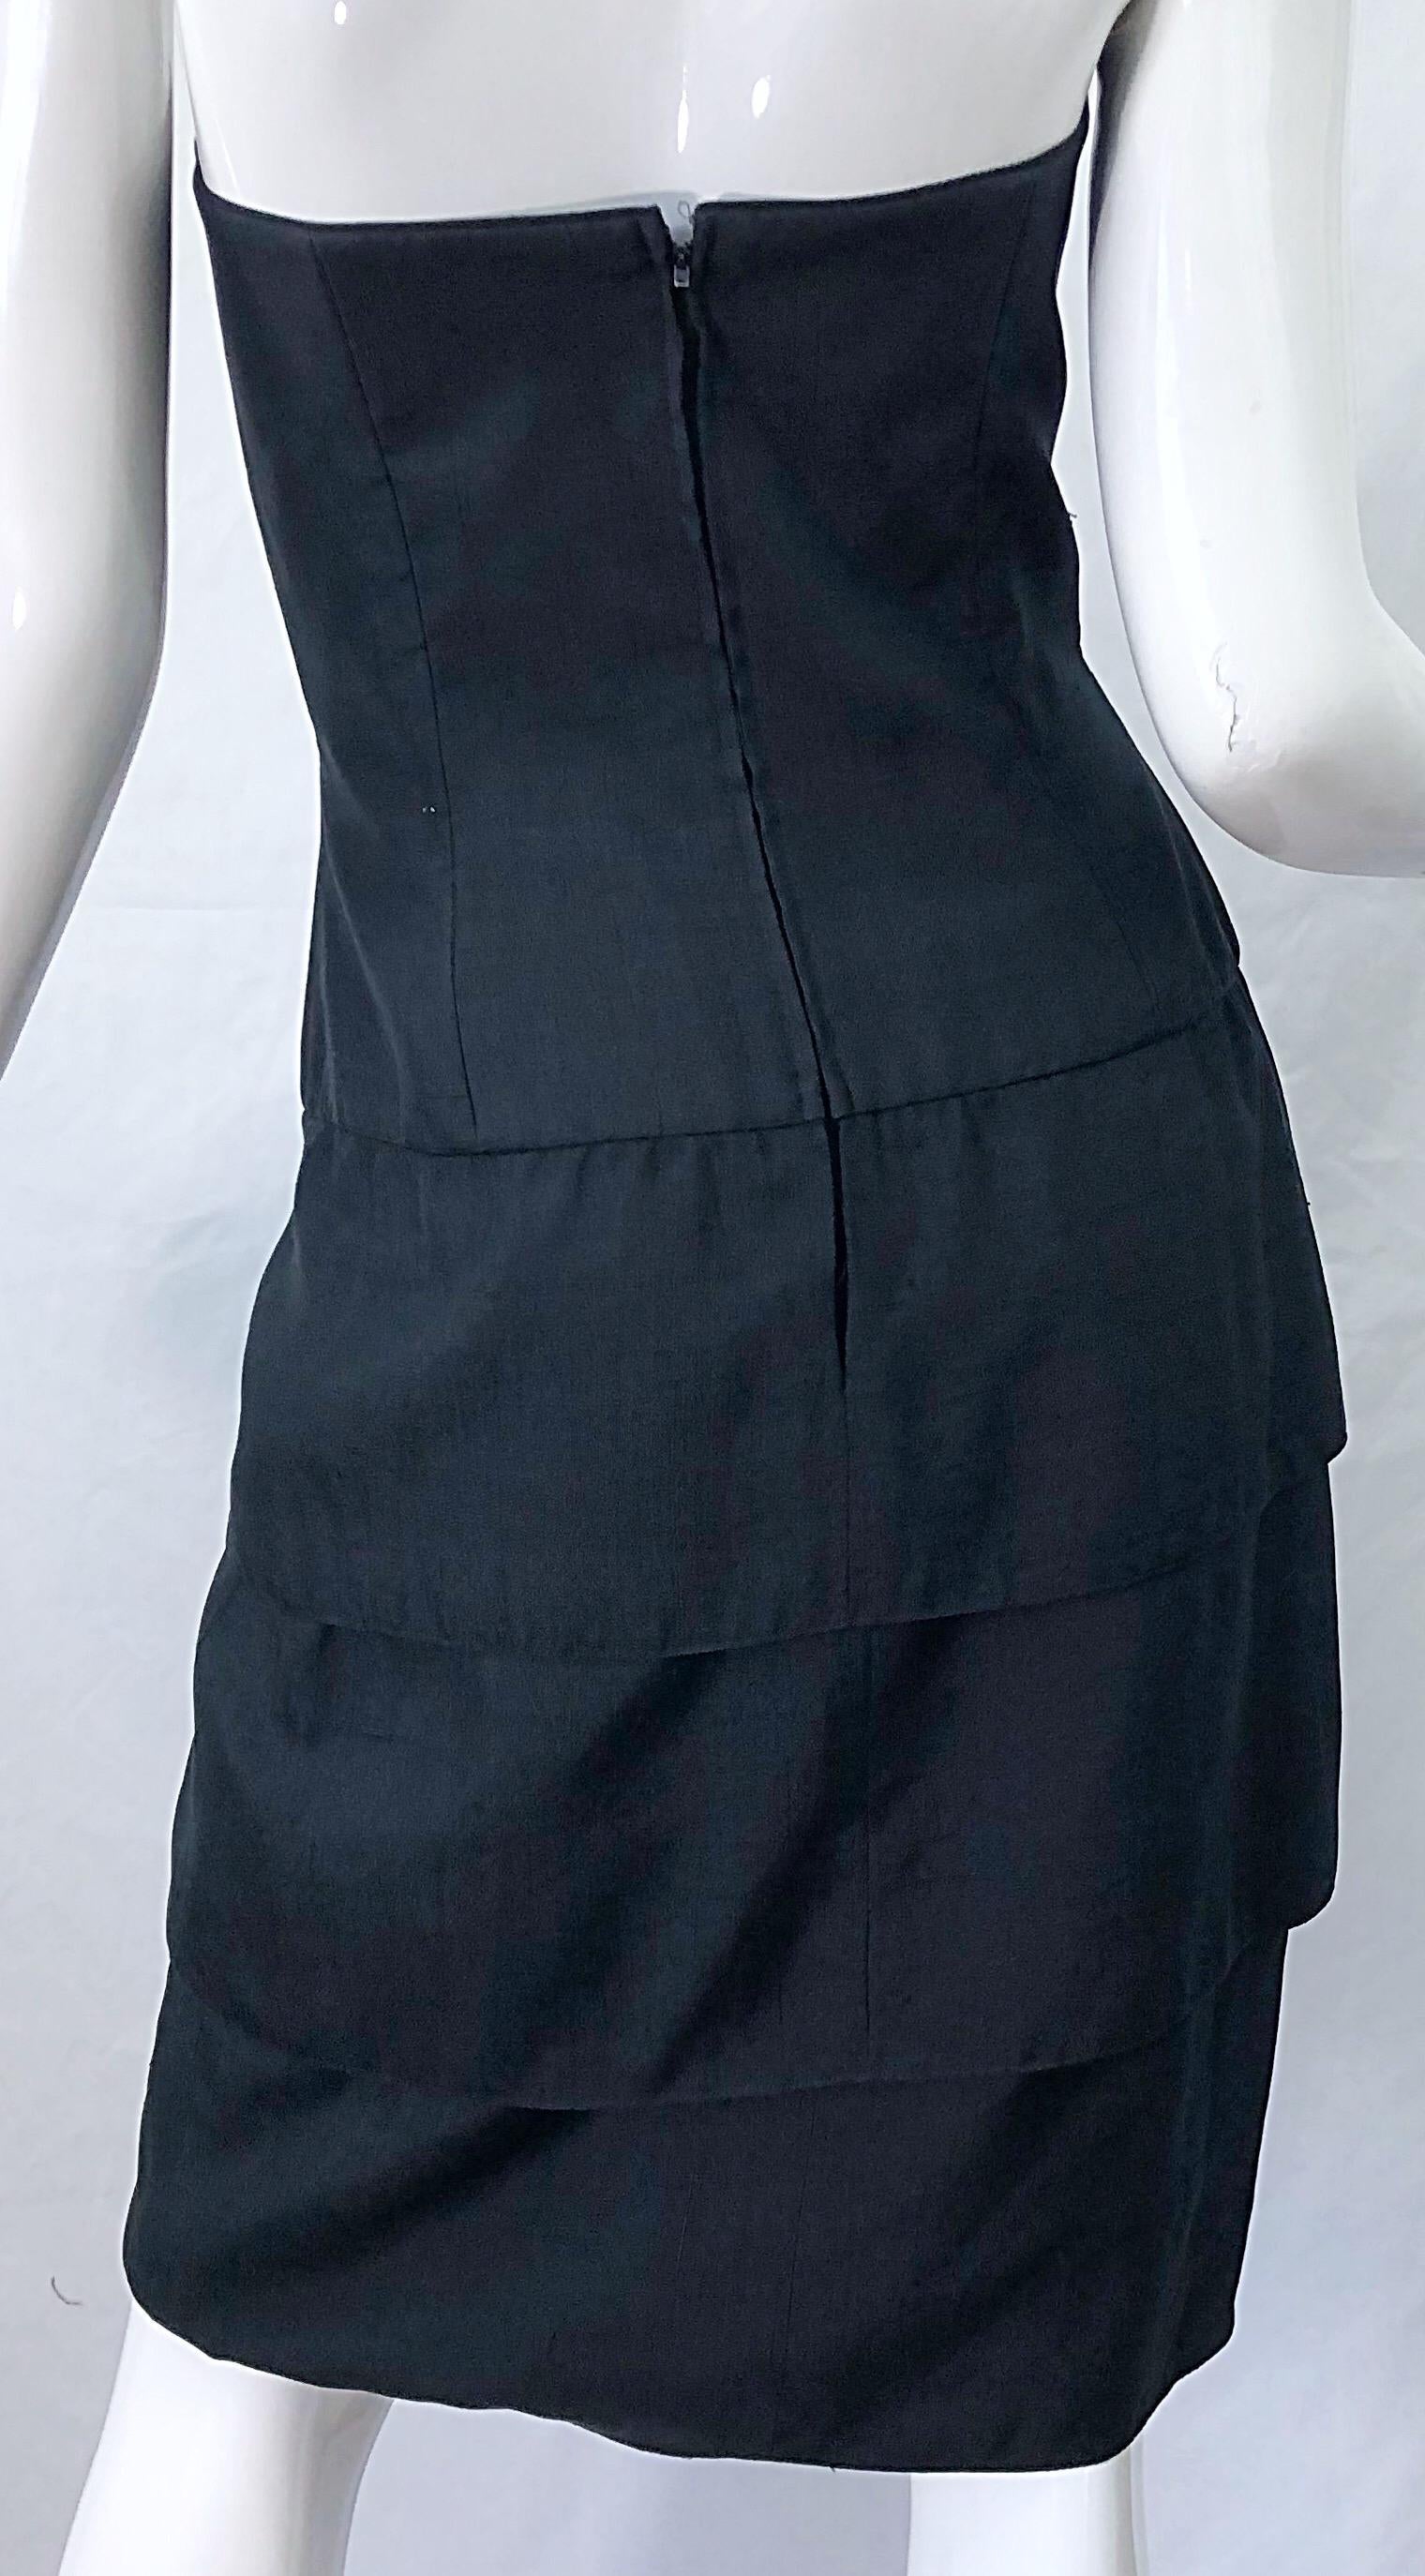 1980s A.J. Bari Lord & Taylor Size 10 / 12 Black Silk Strapless Cocktail Dress In Excellent Condition For Sale In San Diego, CA